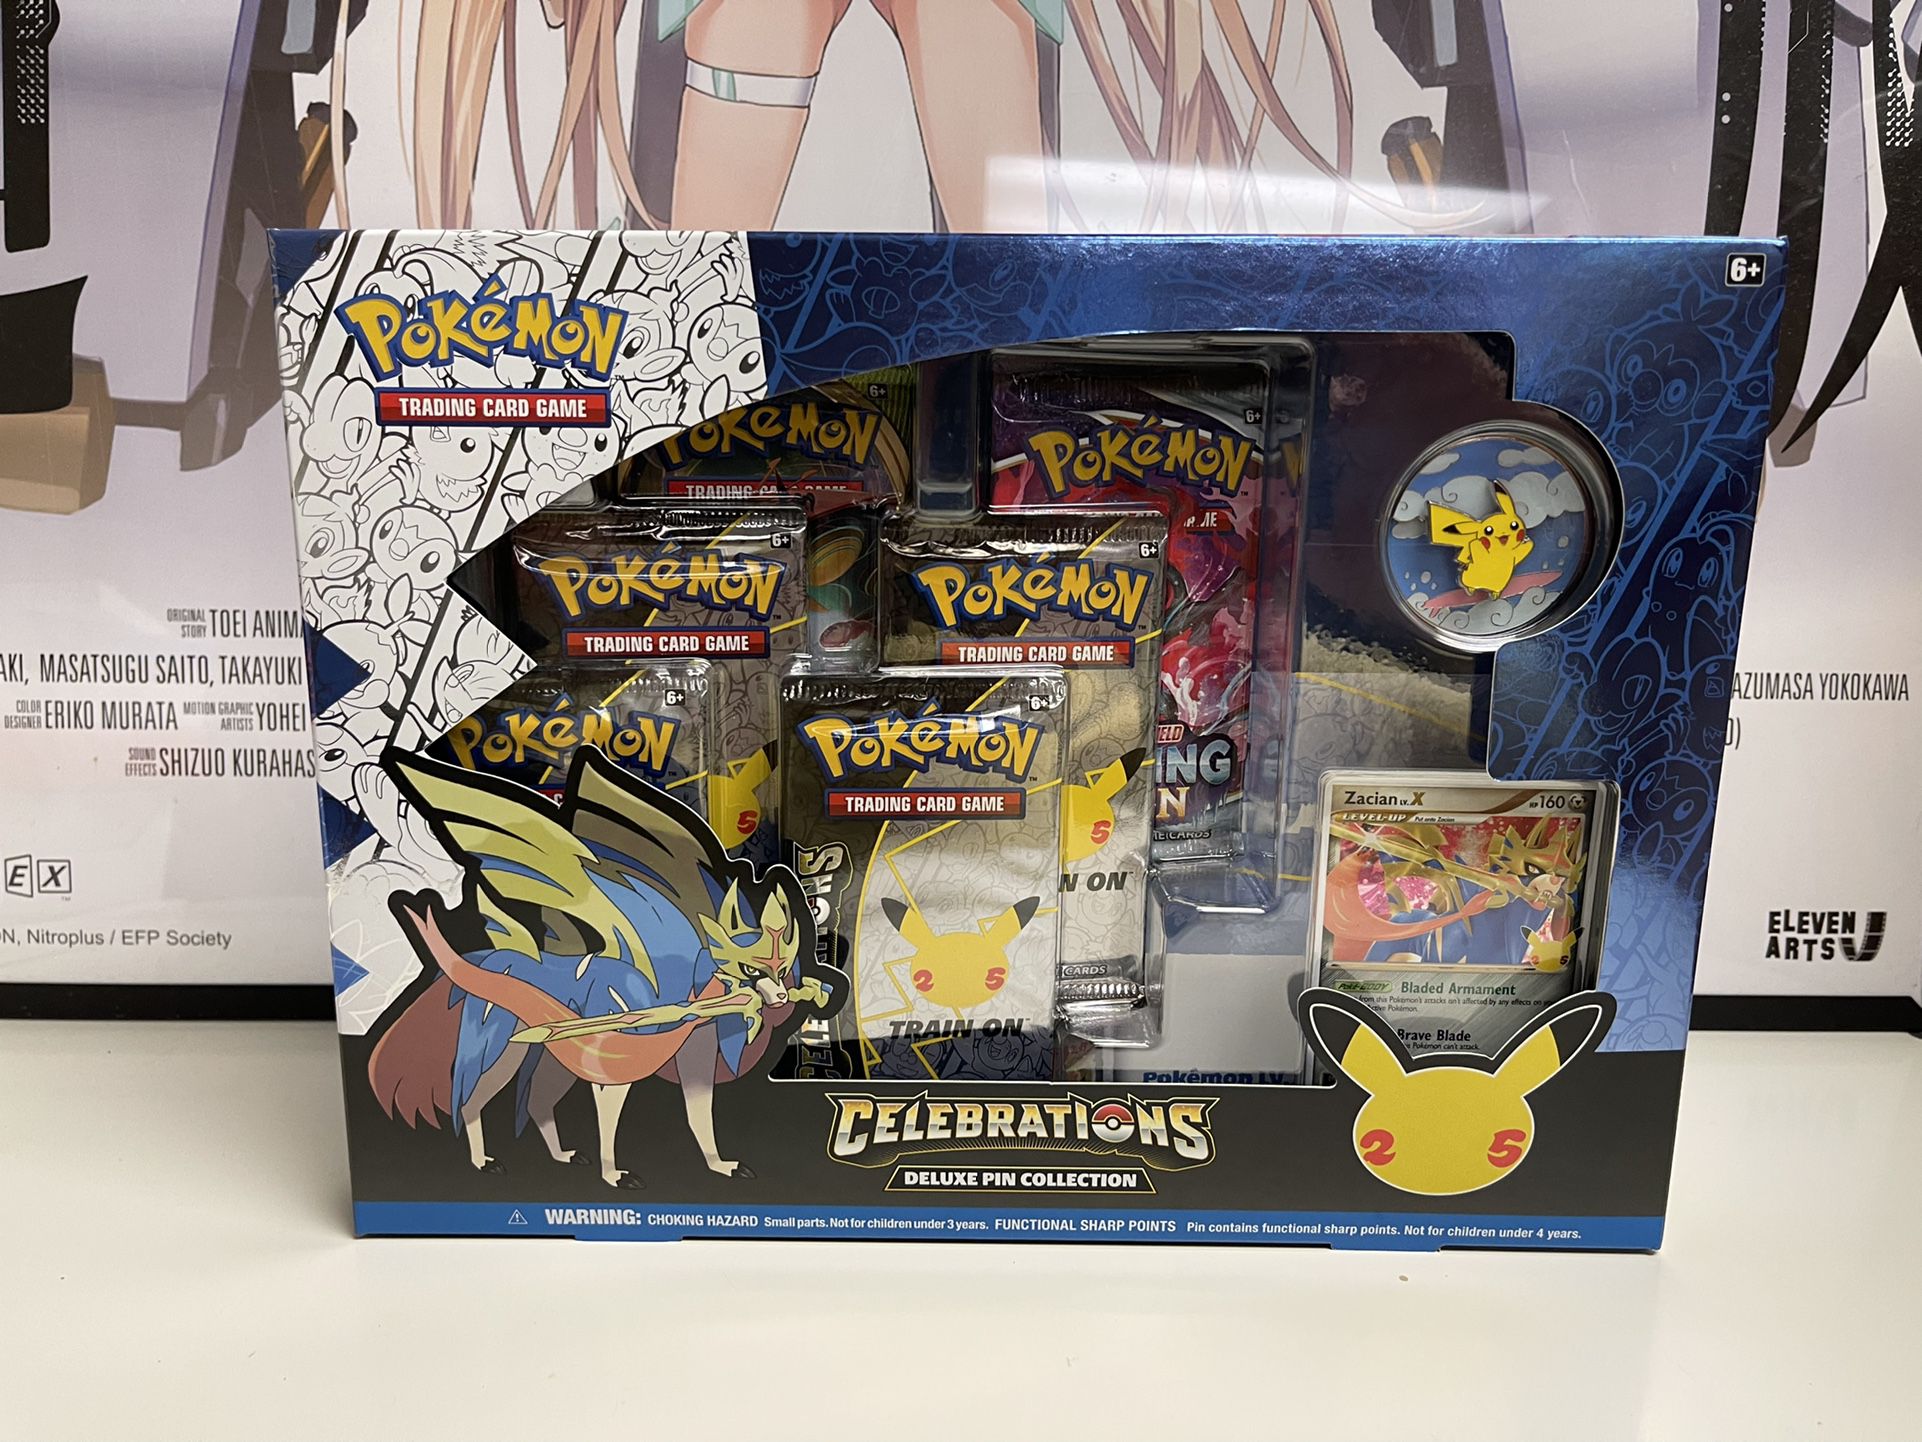 Pokemon trading Card Game: Celebrations Deluxe Pin Collection of Zacian